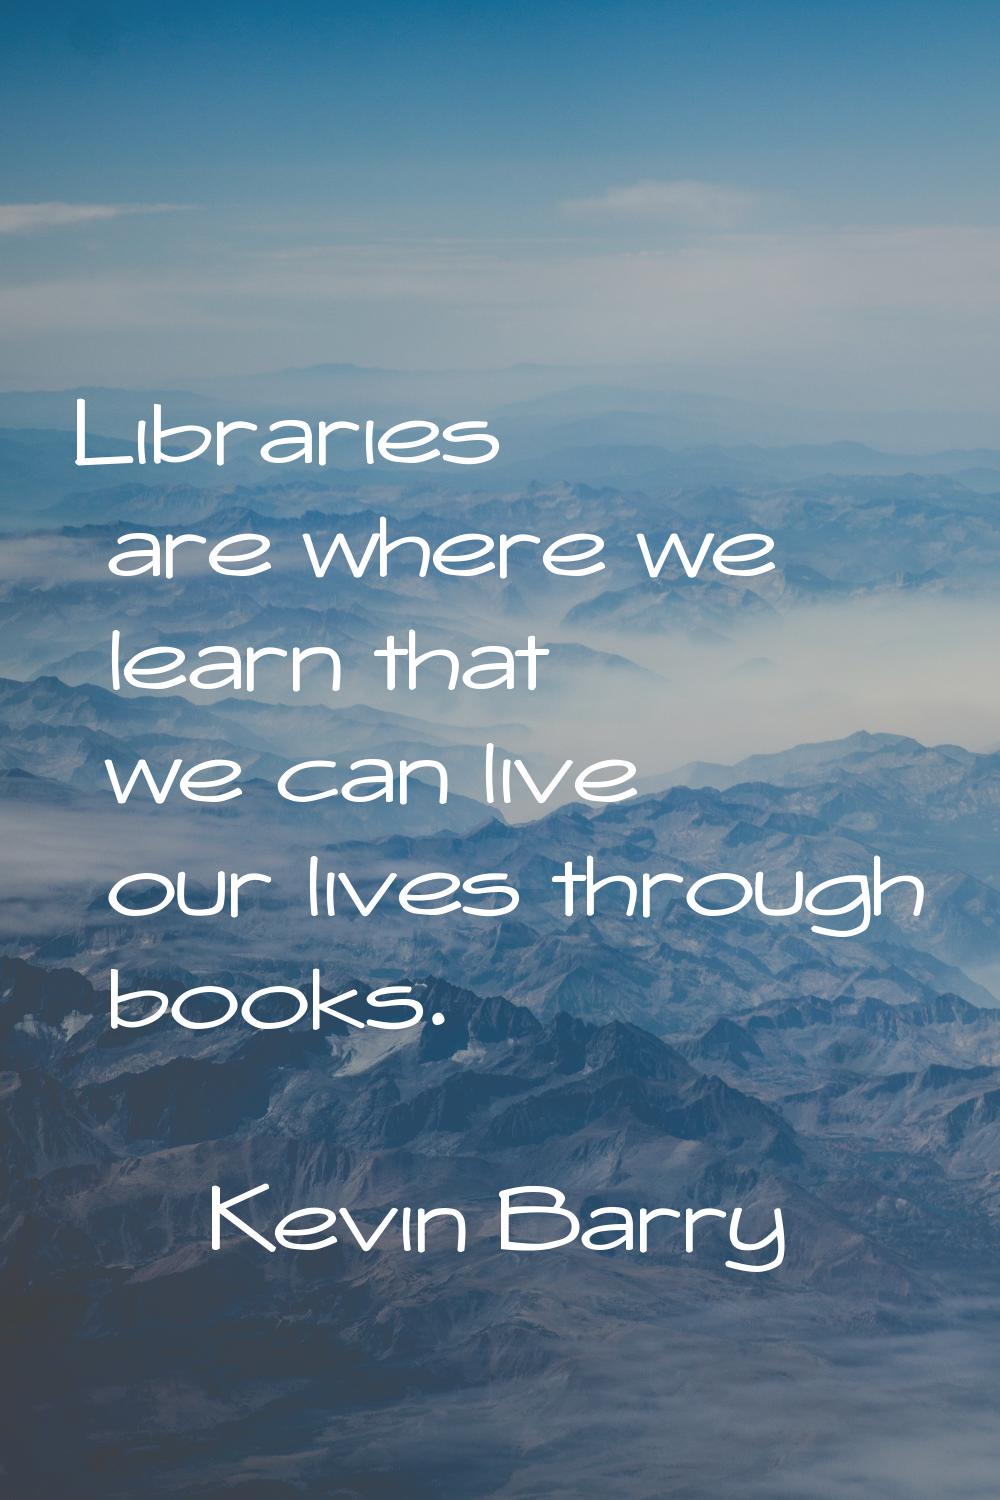 Libraries are where we learn that we can live our lives through books.